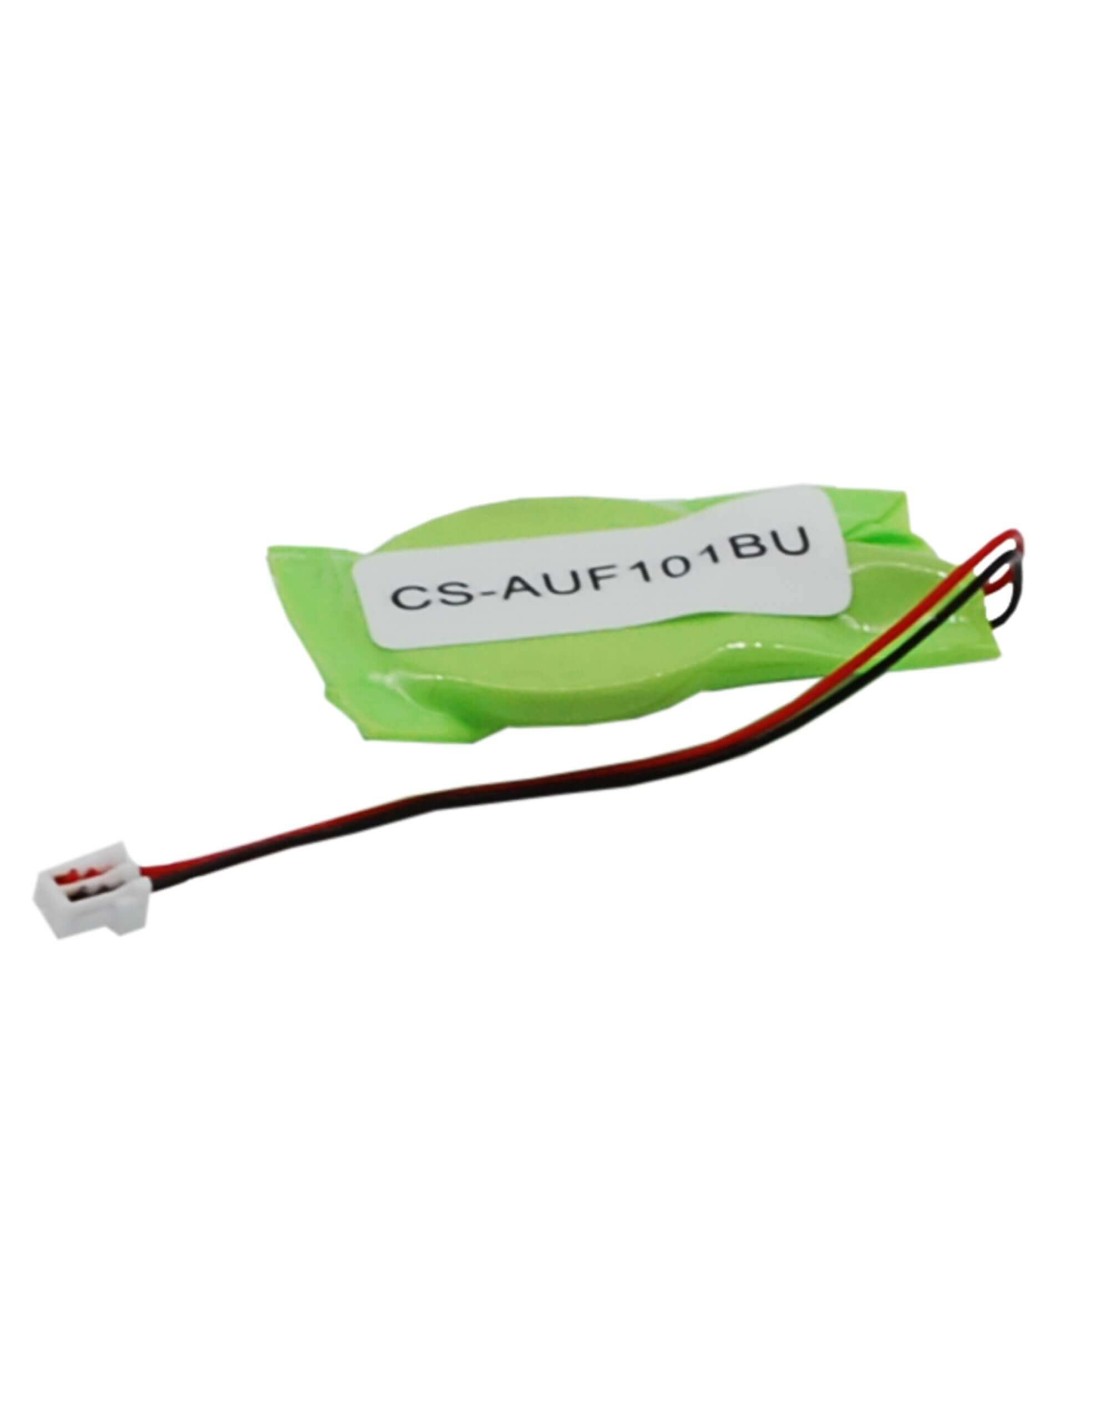 Battery for Asus Eee Transformer Tf101, Eee Pad Transformer Tr101 Prefix, Eee Pad Transformer Tf101 Prefix Mobile Docking 3.0V, 